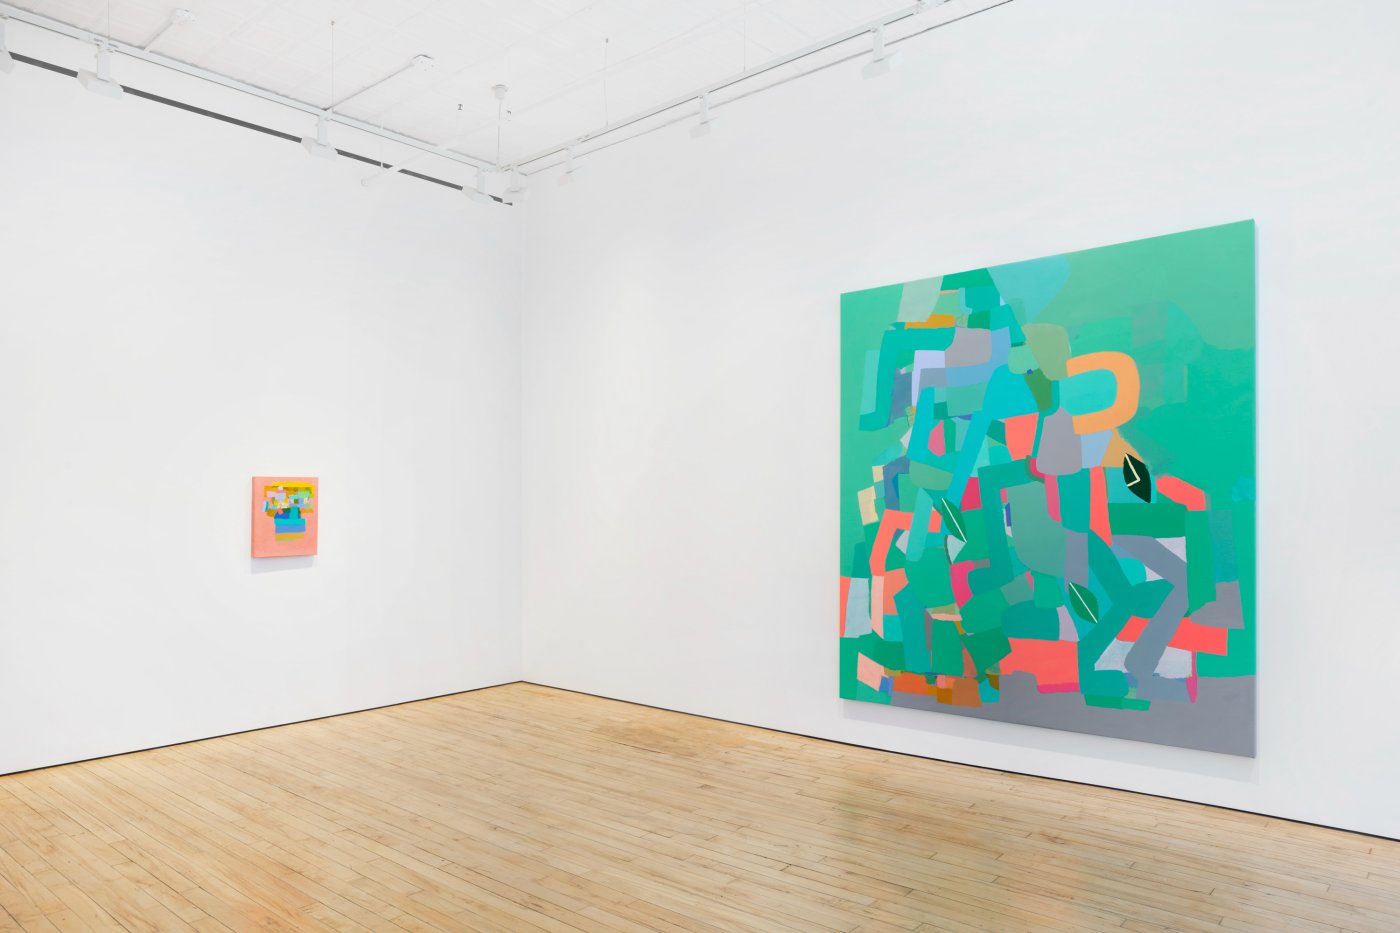 Installation image for Federico Herrero, at James Cohan Gallery